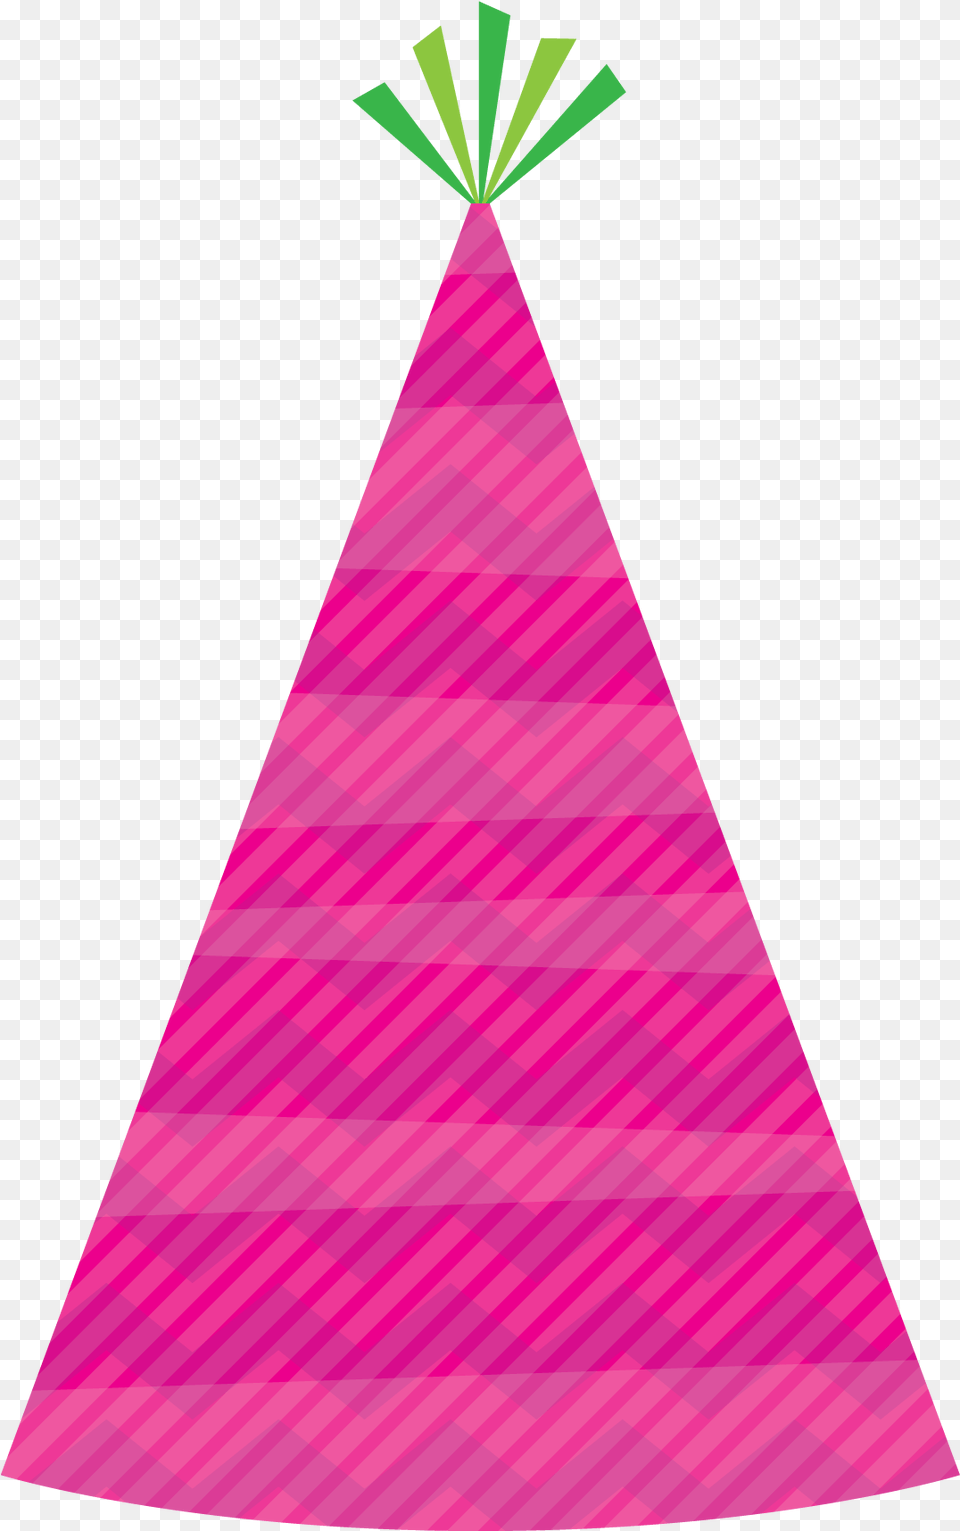 Birthday Hat Party Hats Cartoon, Clothing, Triangle Free Png